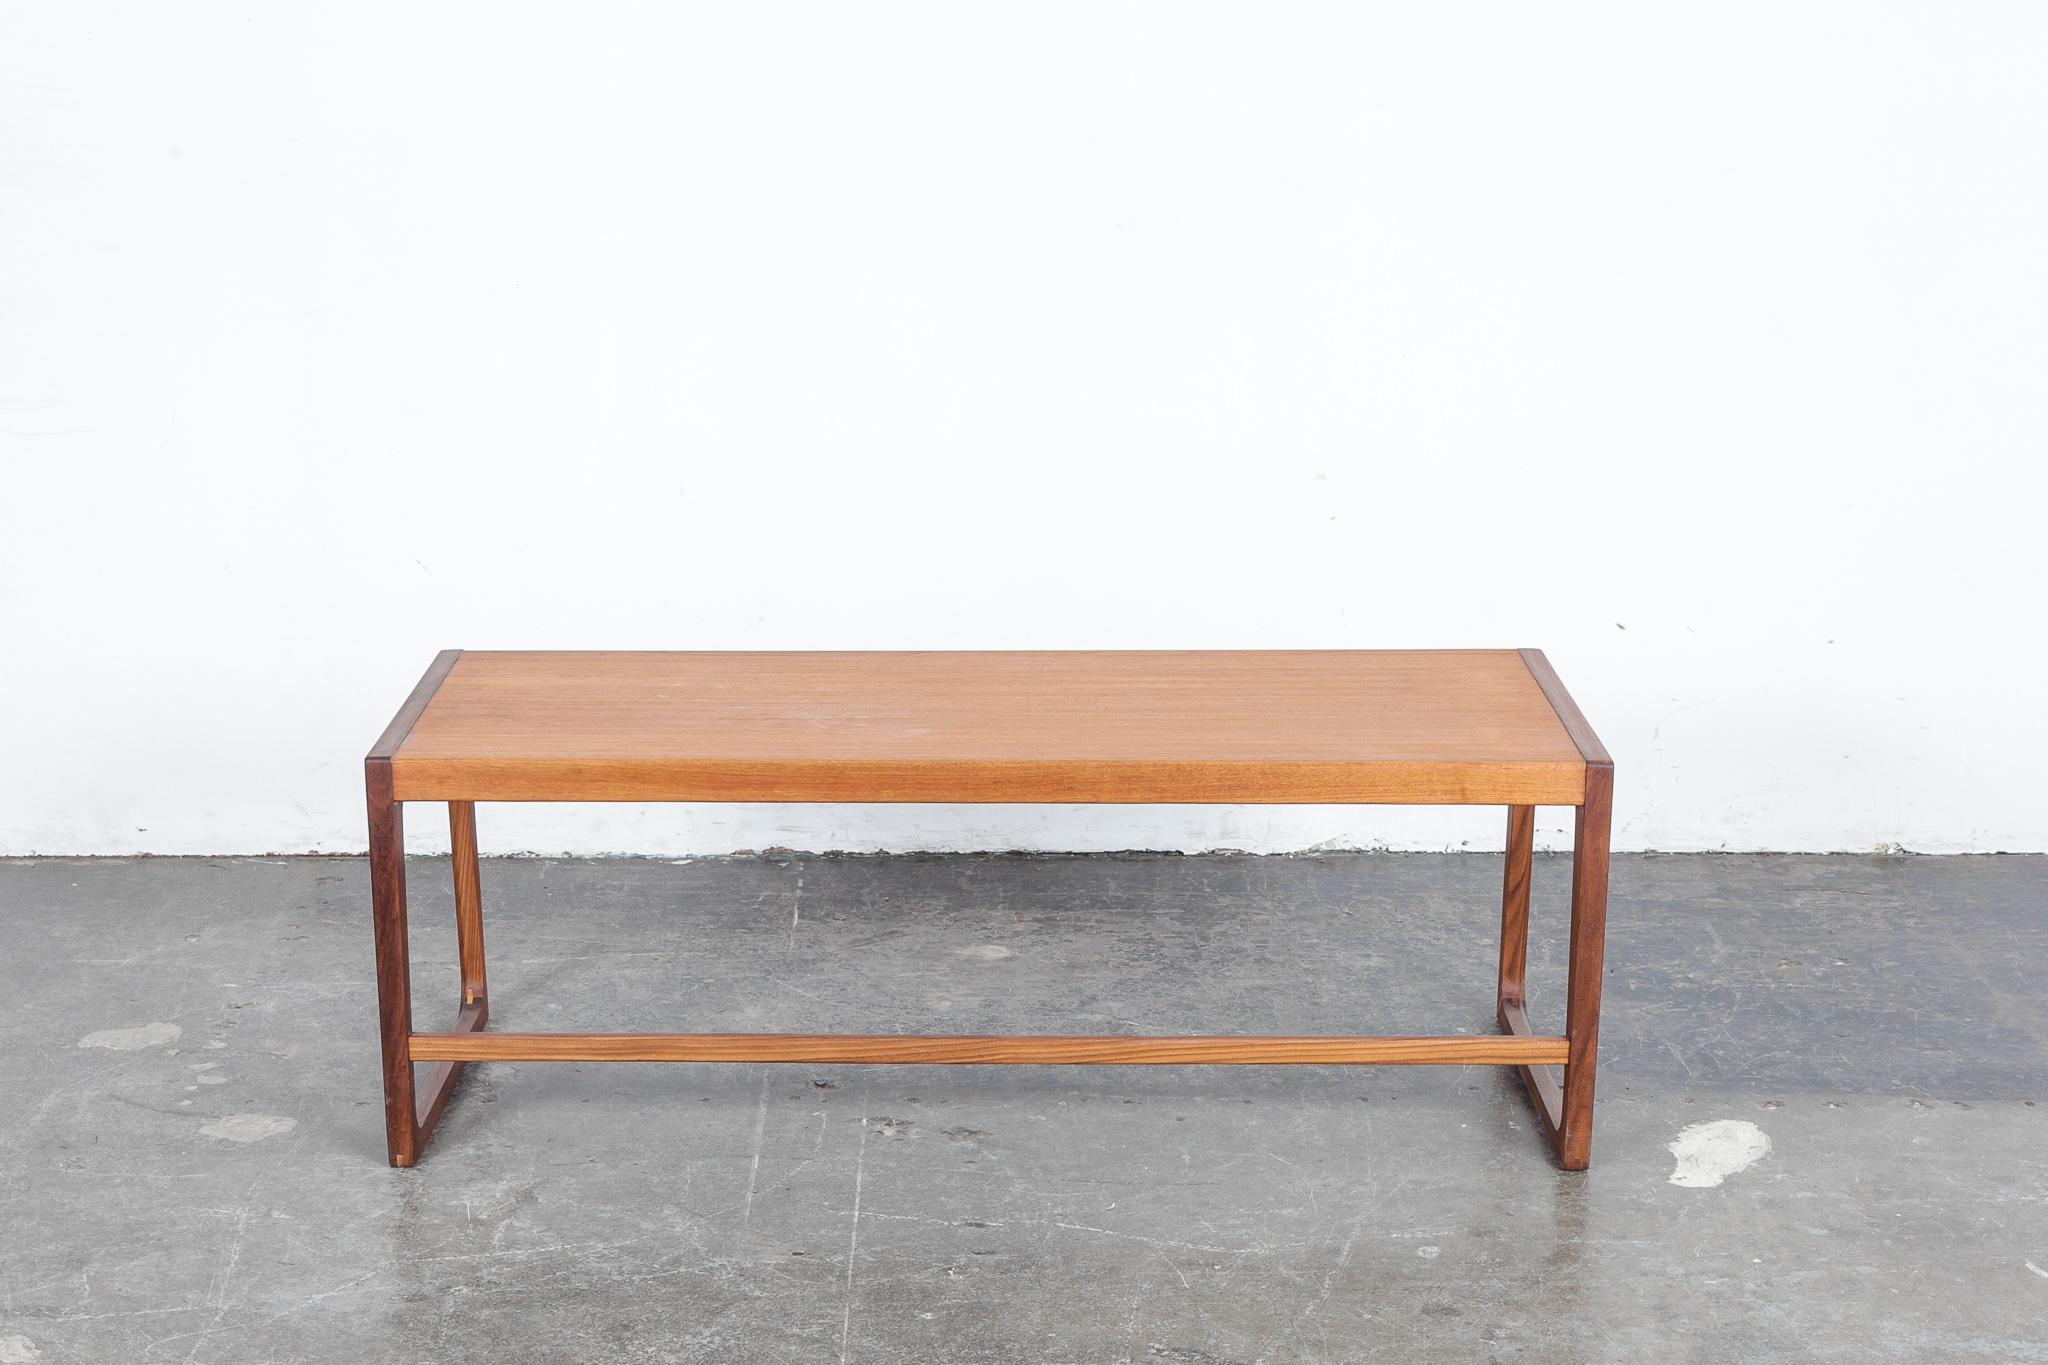 English midcentury two-tone teak and afromosia sleigh leg rectangular coffee table, newly refinished in a natural teak oil, 1950s, UK.

 